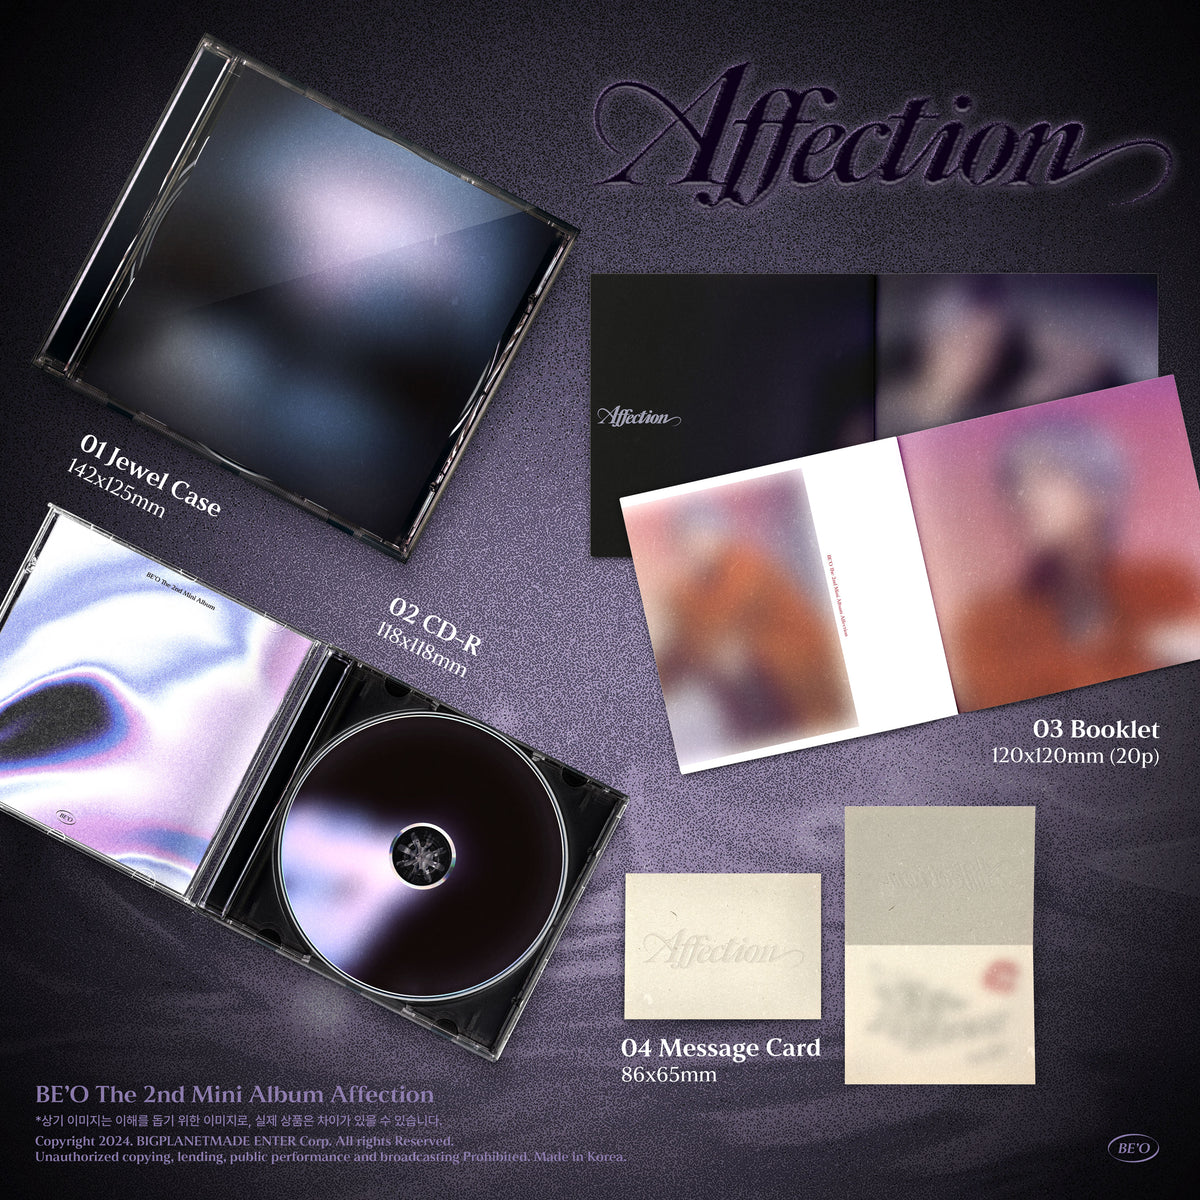 BE'O THE 2ND MINI ALBUM - AFFECTION (JEWEL CASE VER.)